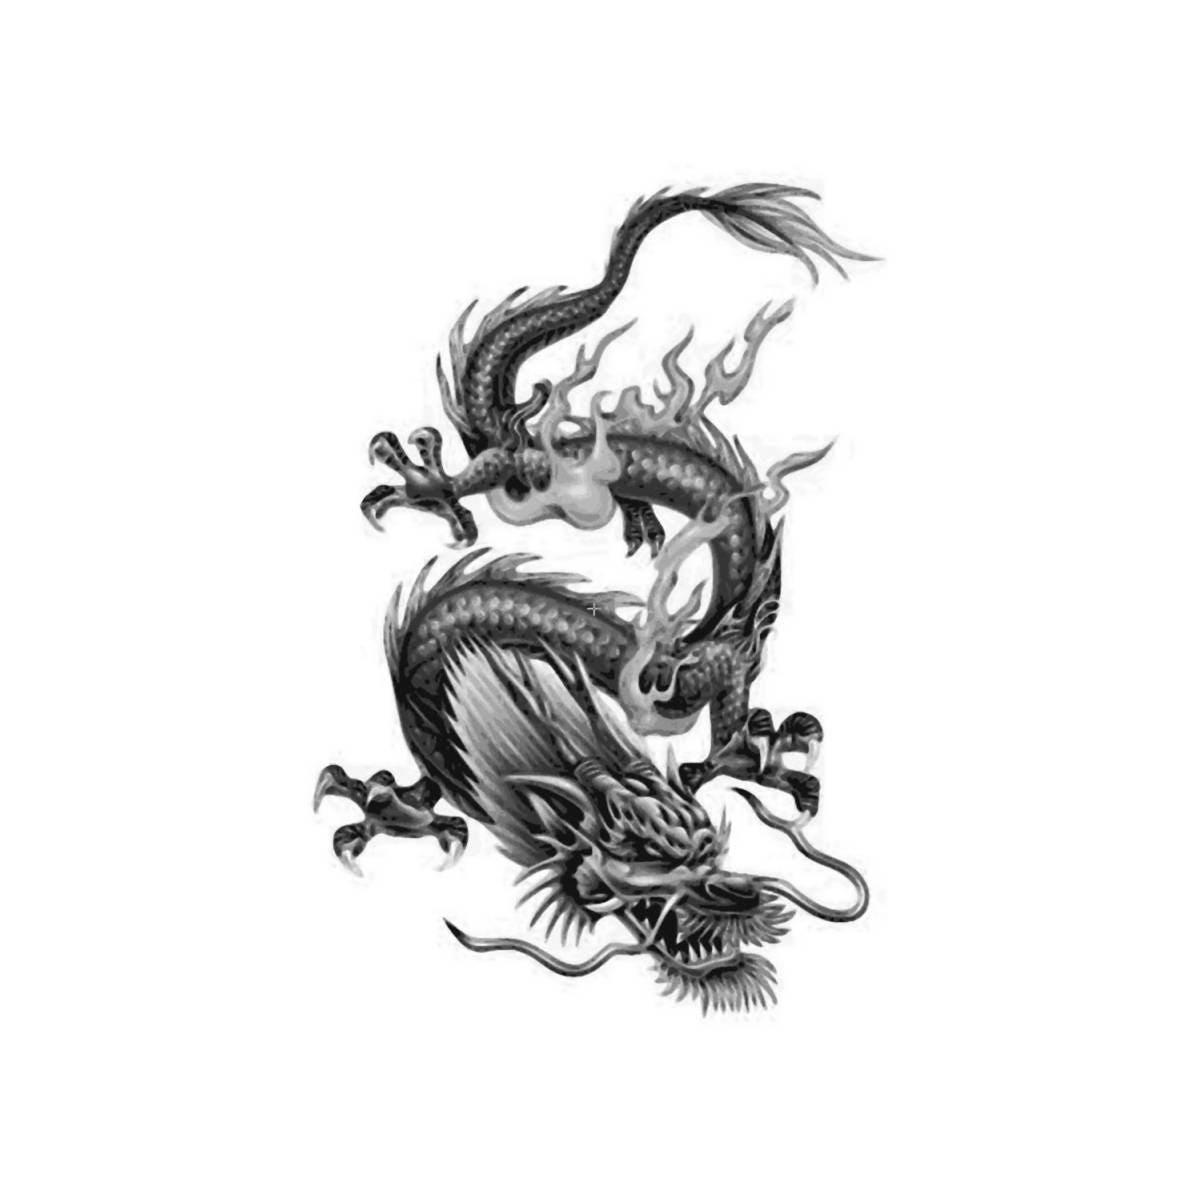 Buy Asian Dragon Temporary Fake Tattoo Sticker set of 2 Online in India   Etsy